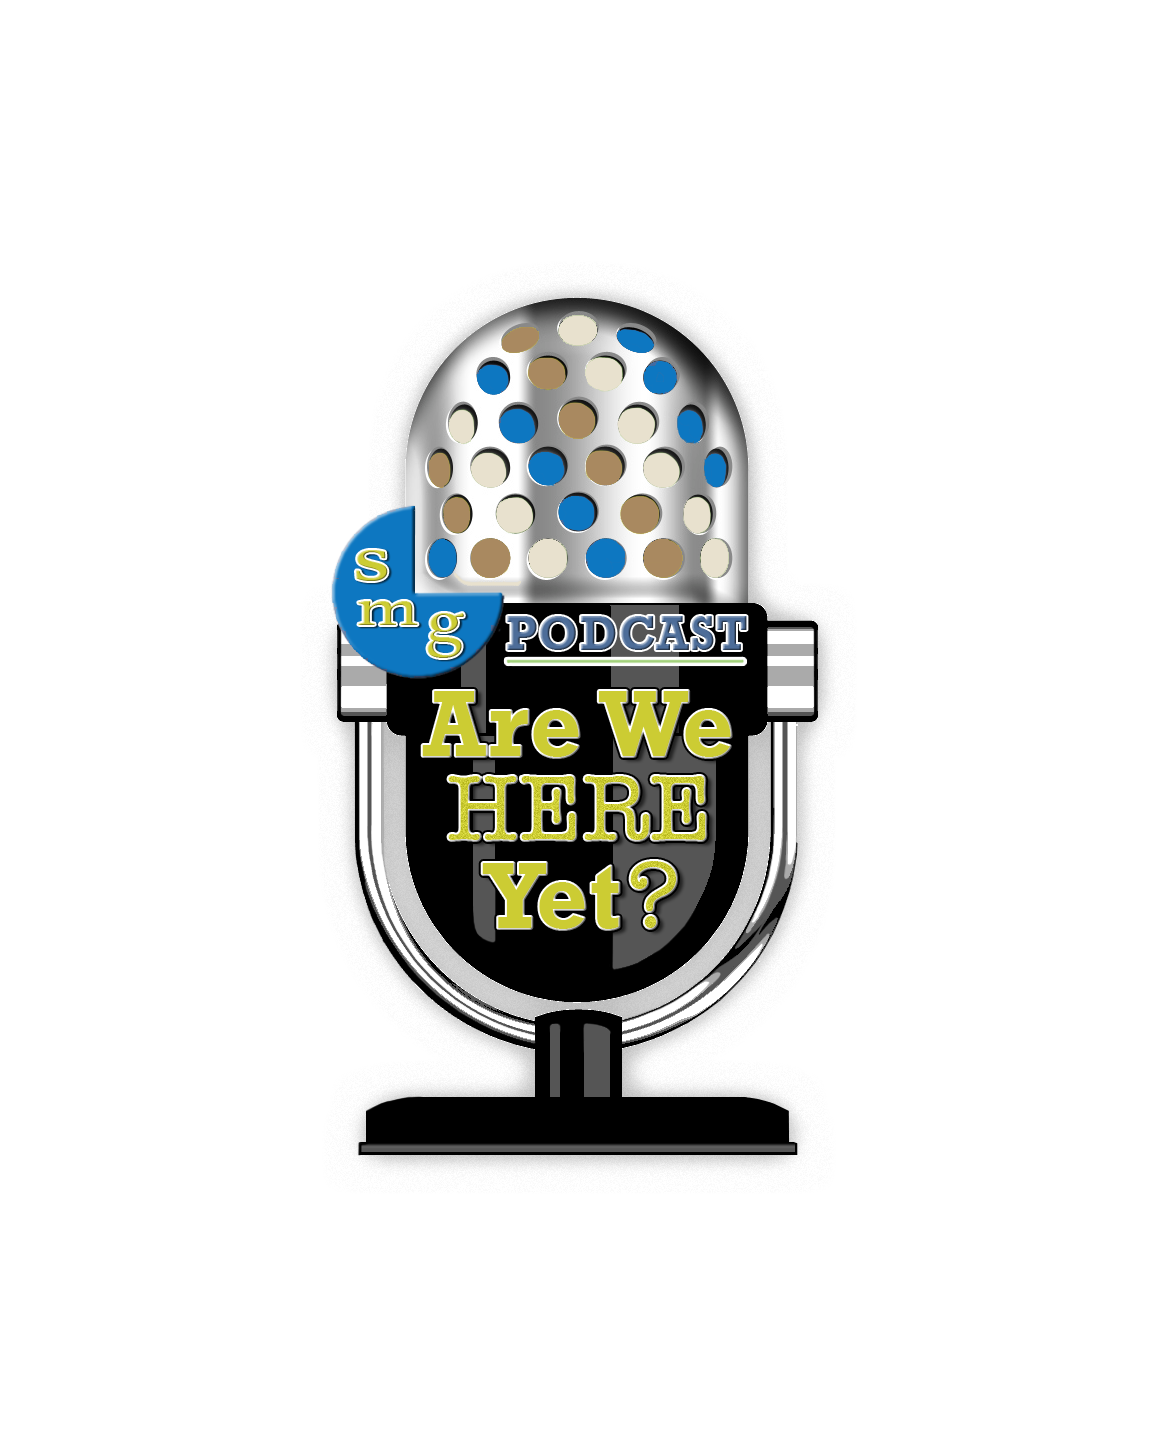 Offical Logo of SMG's 'Are We Here Yet? Podcast